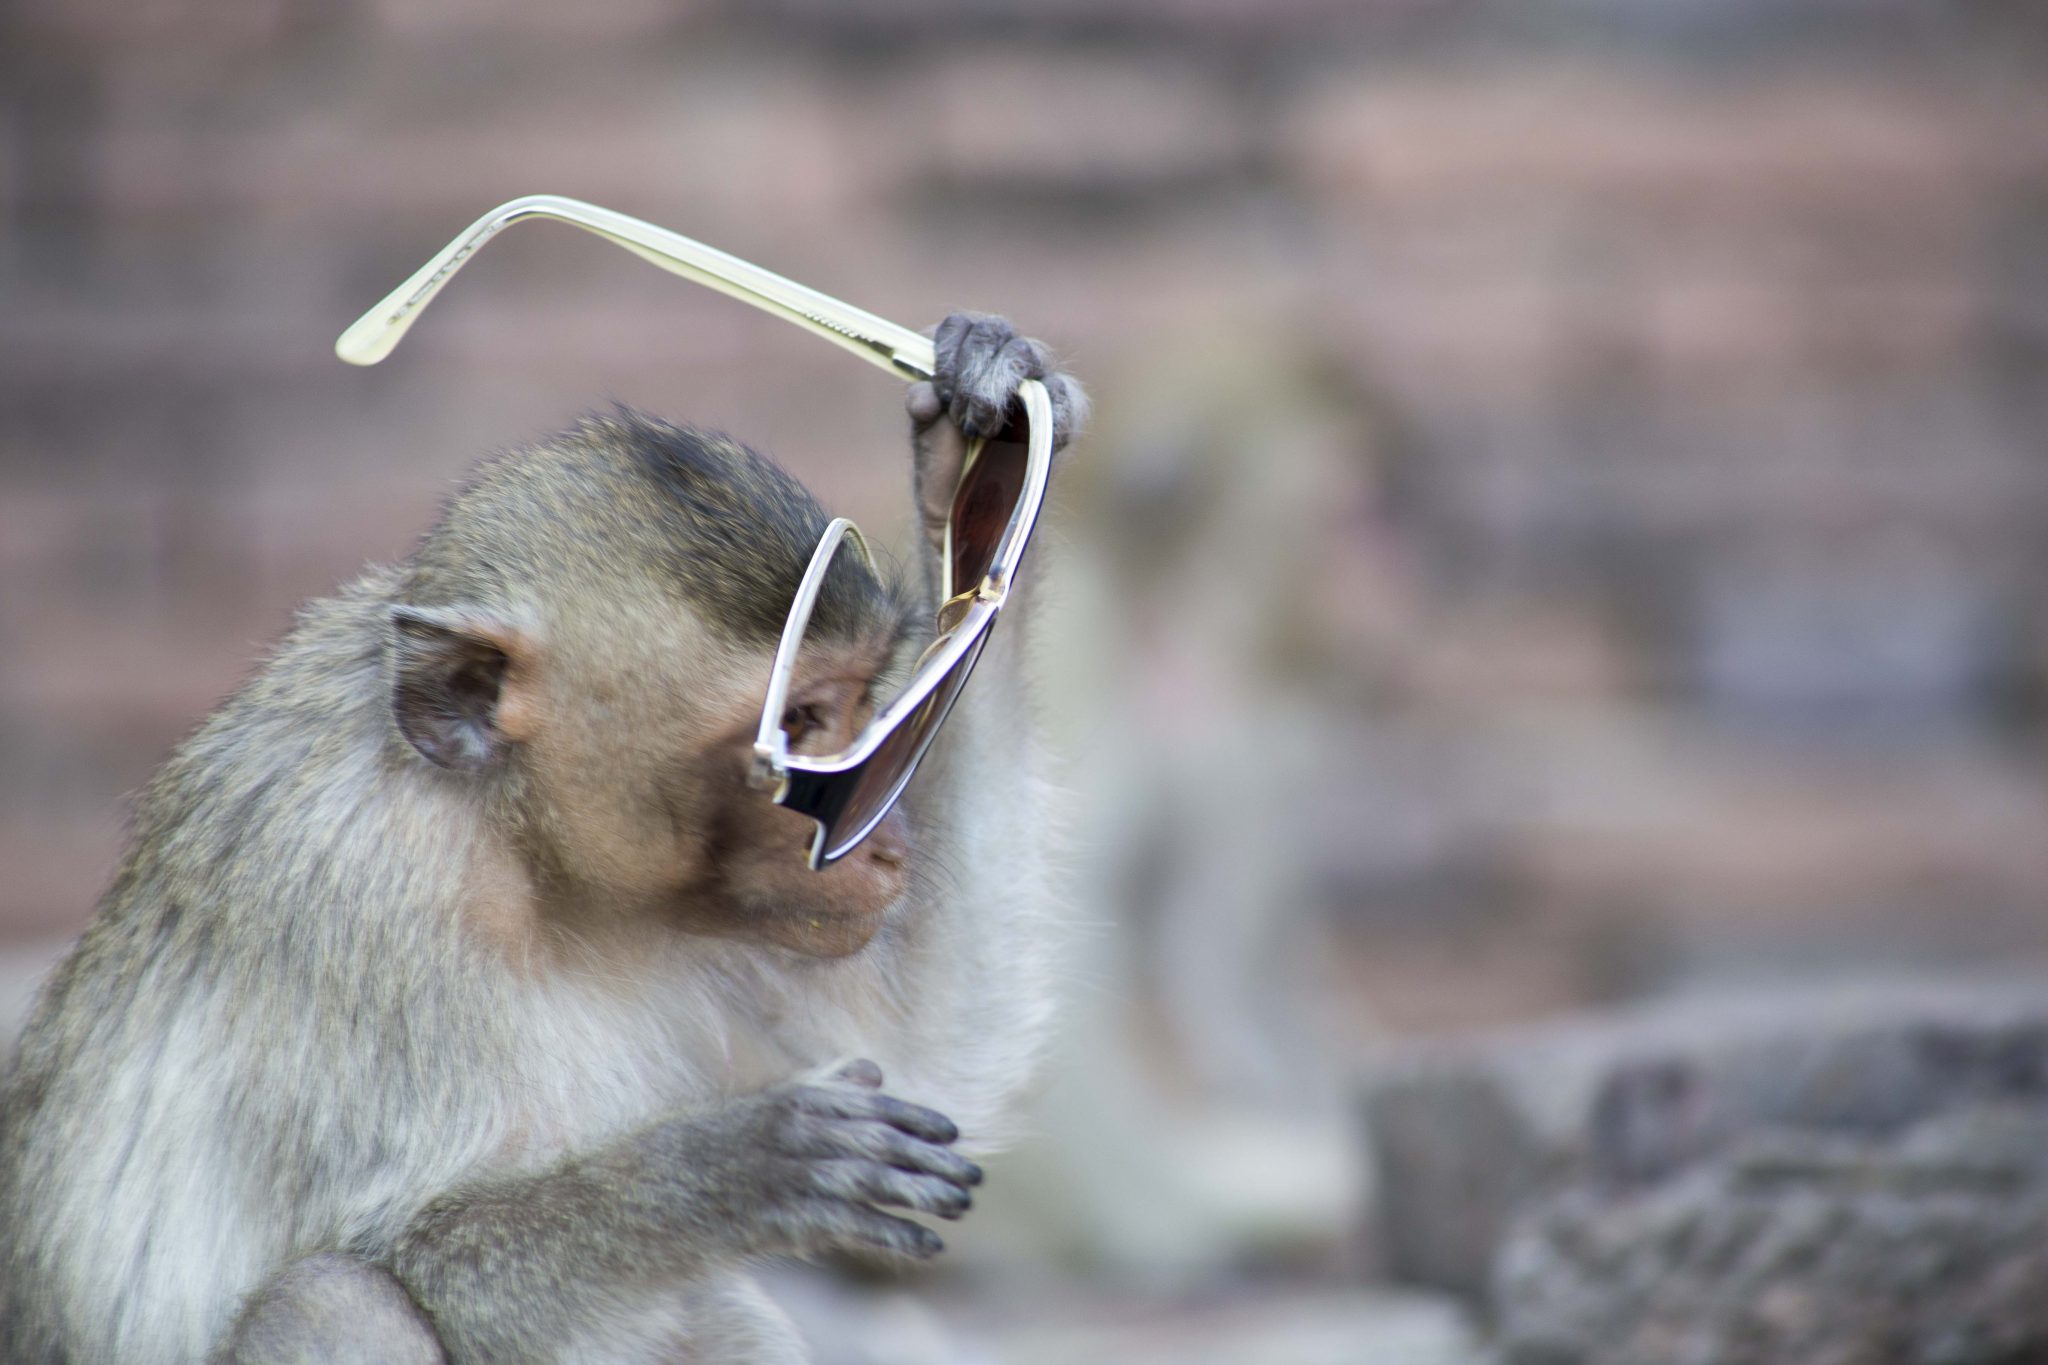 Thailand’s Monkey Temple…and my favourite sunglasses